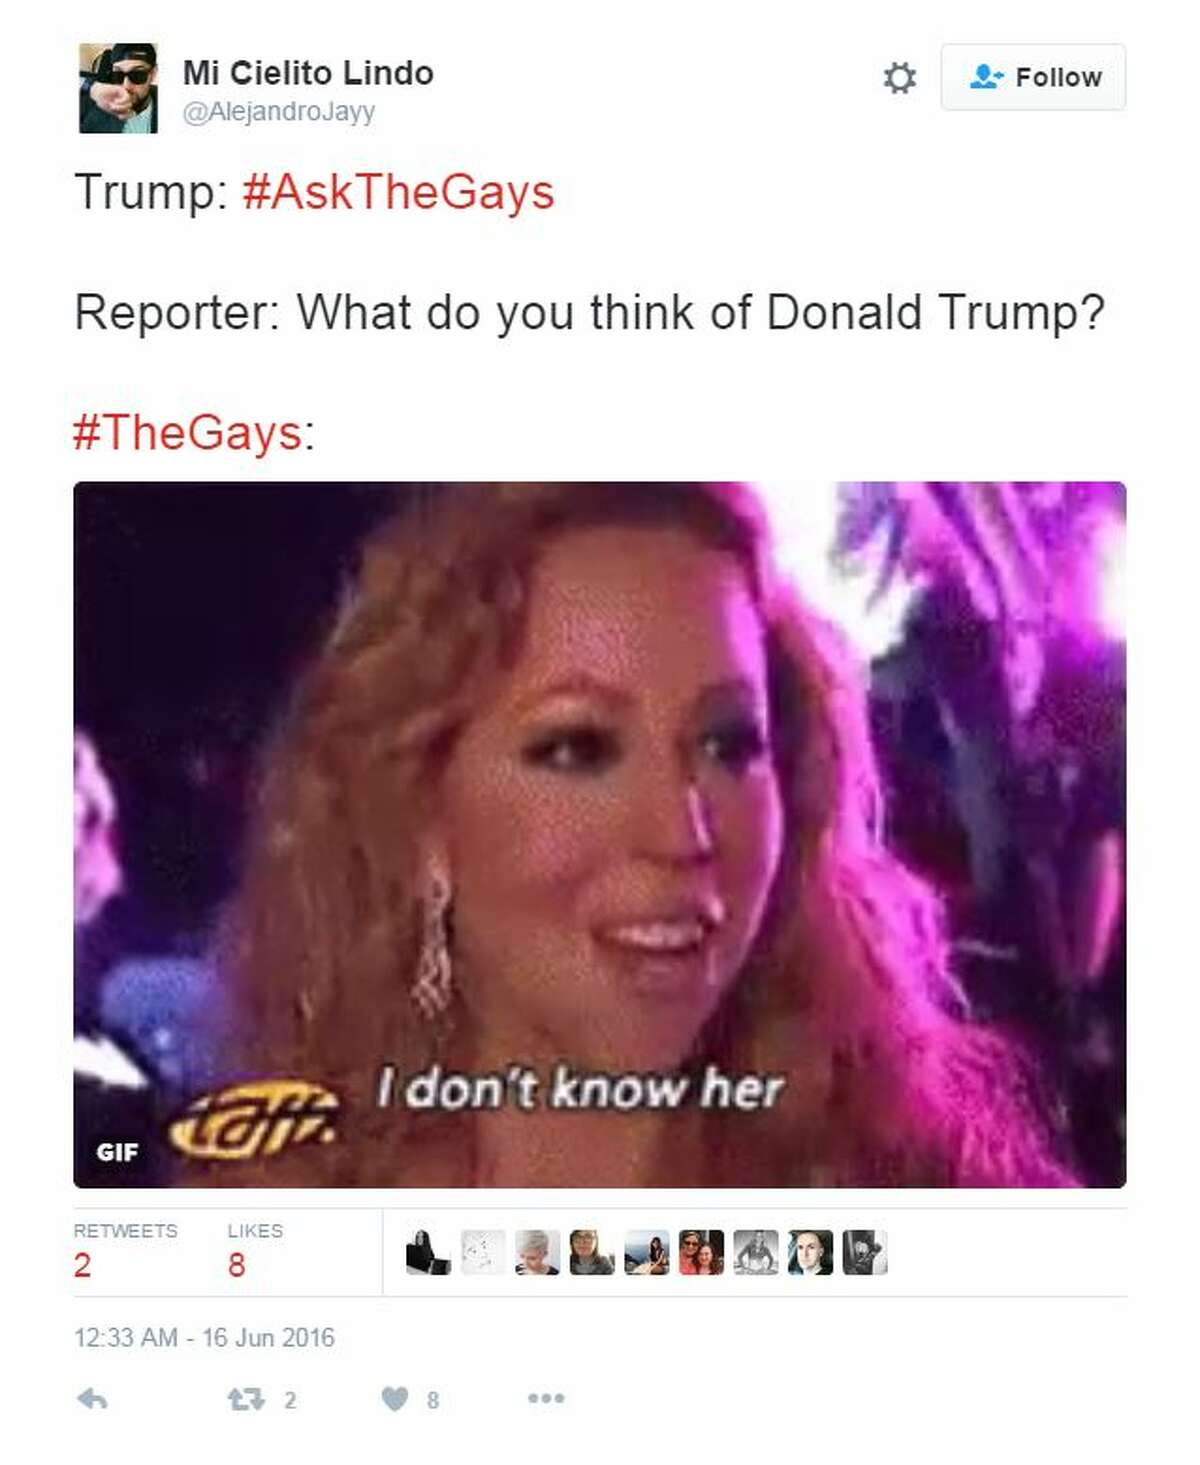 Twitter users spared no GIF when they took over the #AskTheGays hashtag on Twitter Wednesday night.